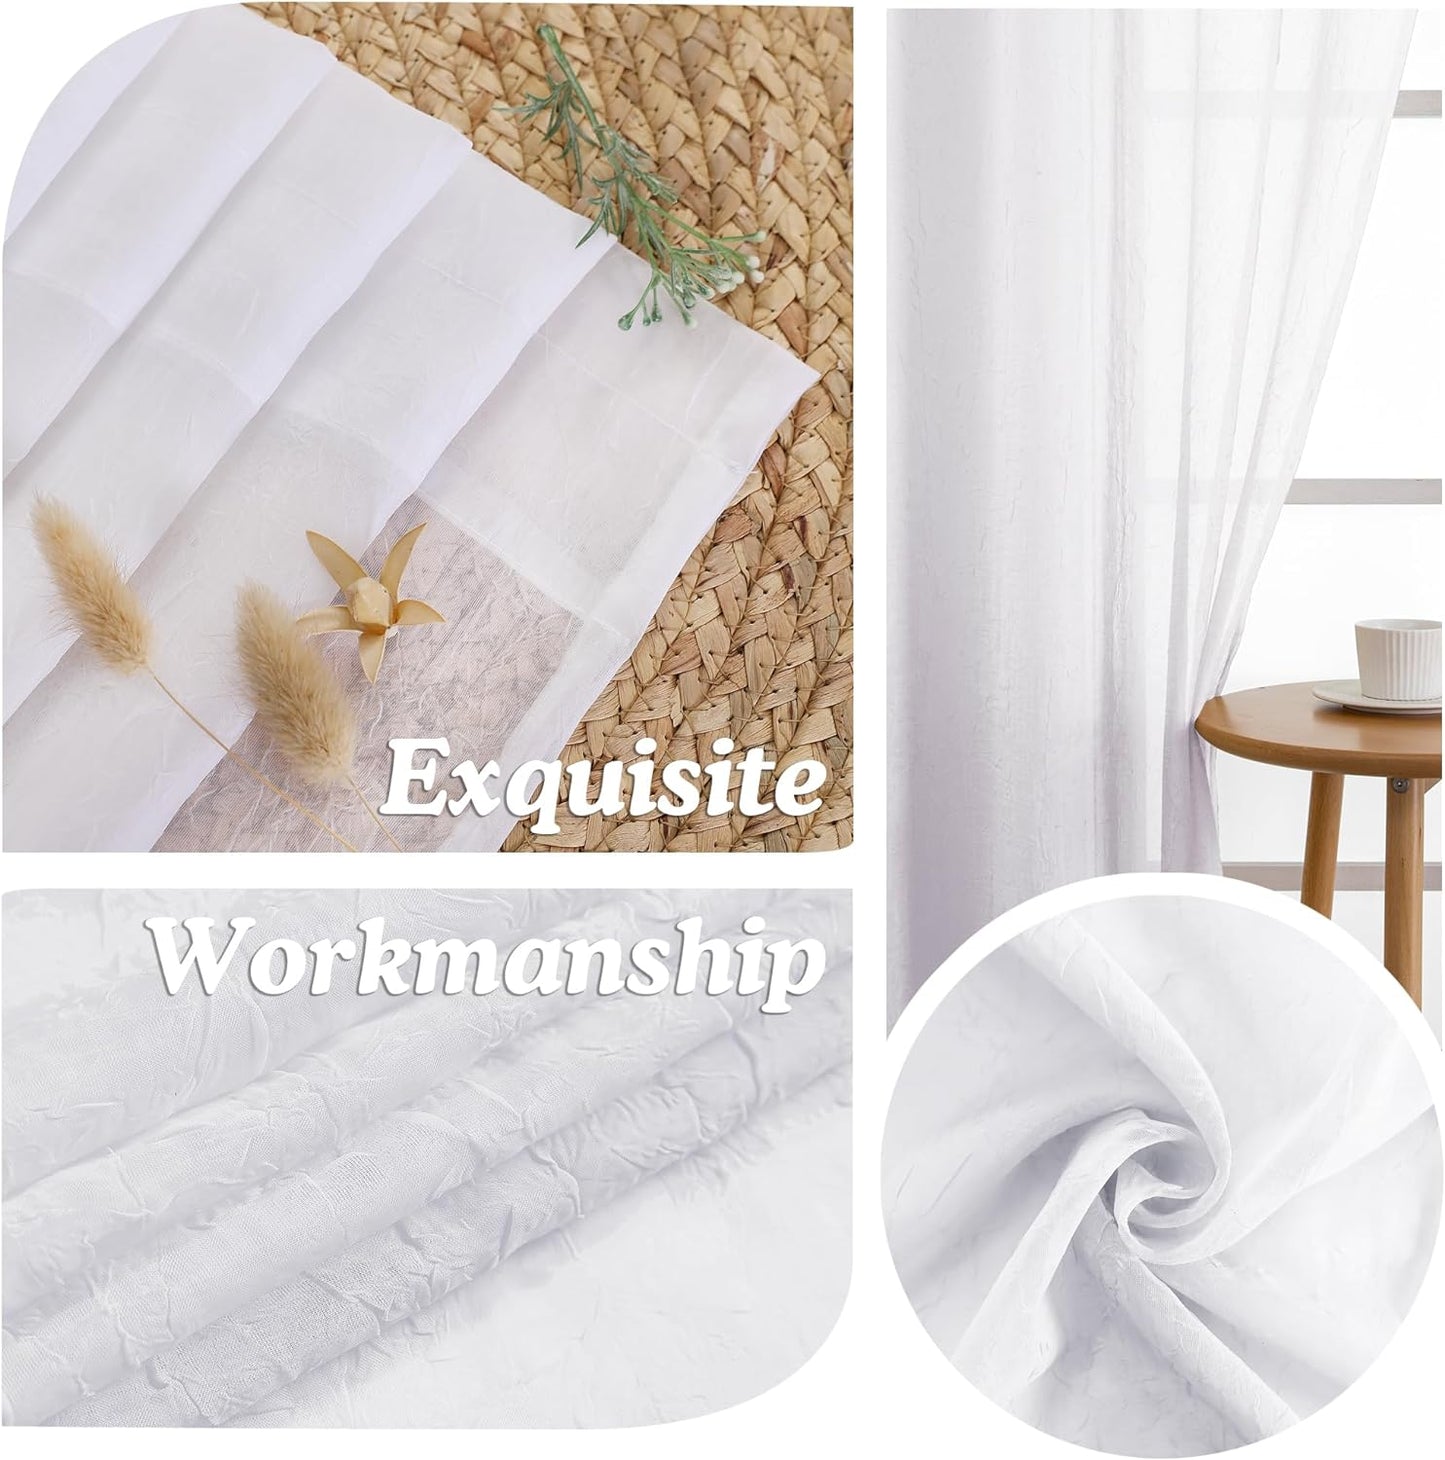 Chyhomenyc Crushed White Sheer Valances for Window 14 Inch Length 2 PCS, Crinkle Voile Short Kitchen Curtains with Dual Rod Pockets，Gauzy Bedroom Curtain Valance，Each 42Wx14L Inches  Chyhomenyc   